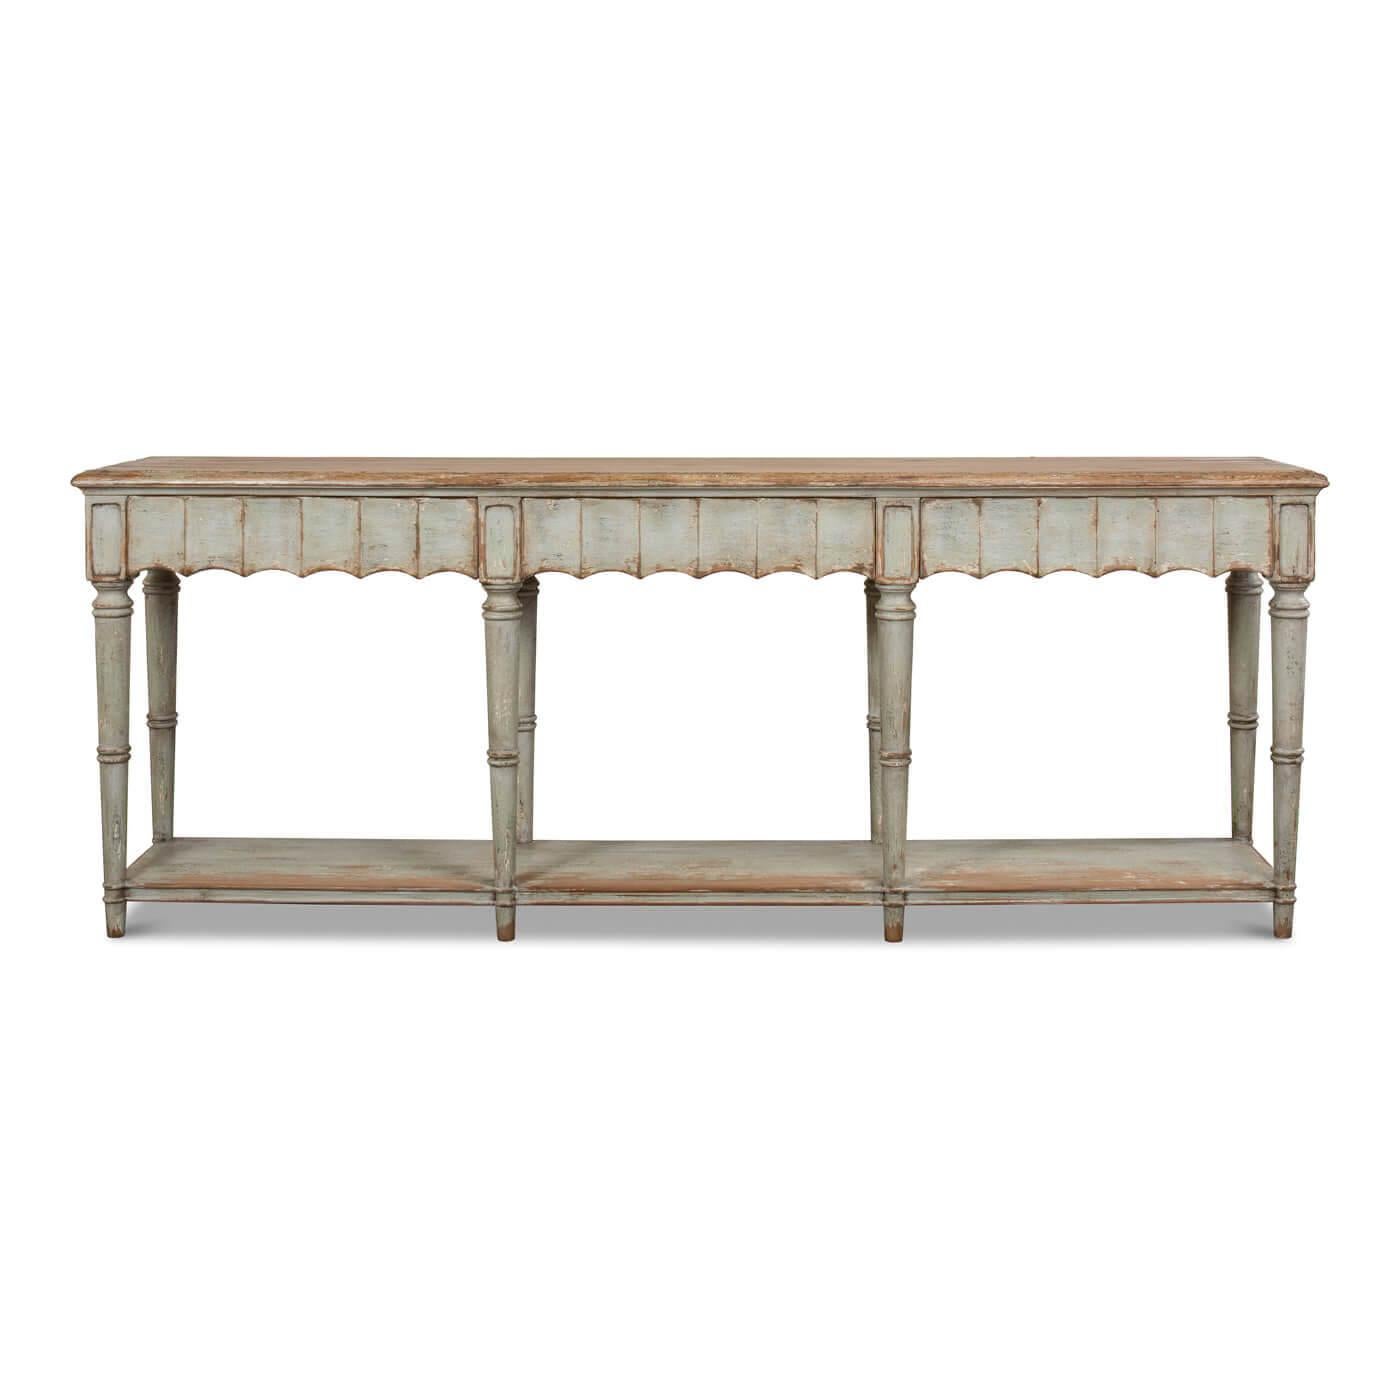 A Large French Country console table. This beautiful table has a natural top with a lightly distressed painted finish in soft sage green. The front apron of this piece has a beautiful fluted design. It has three drawers, eight turned and tapered